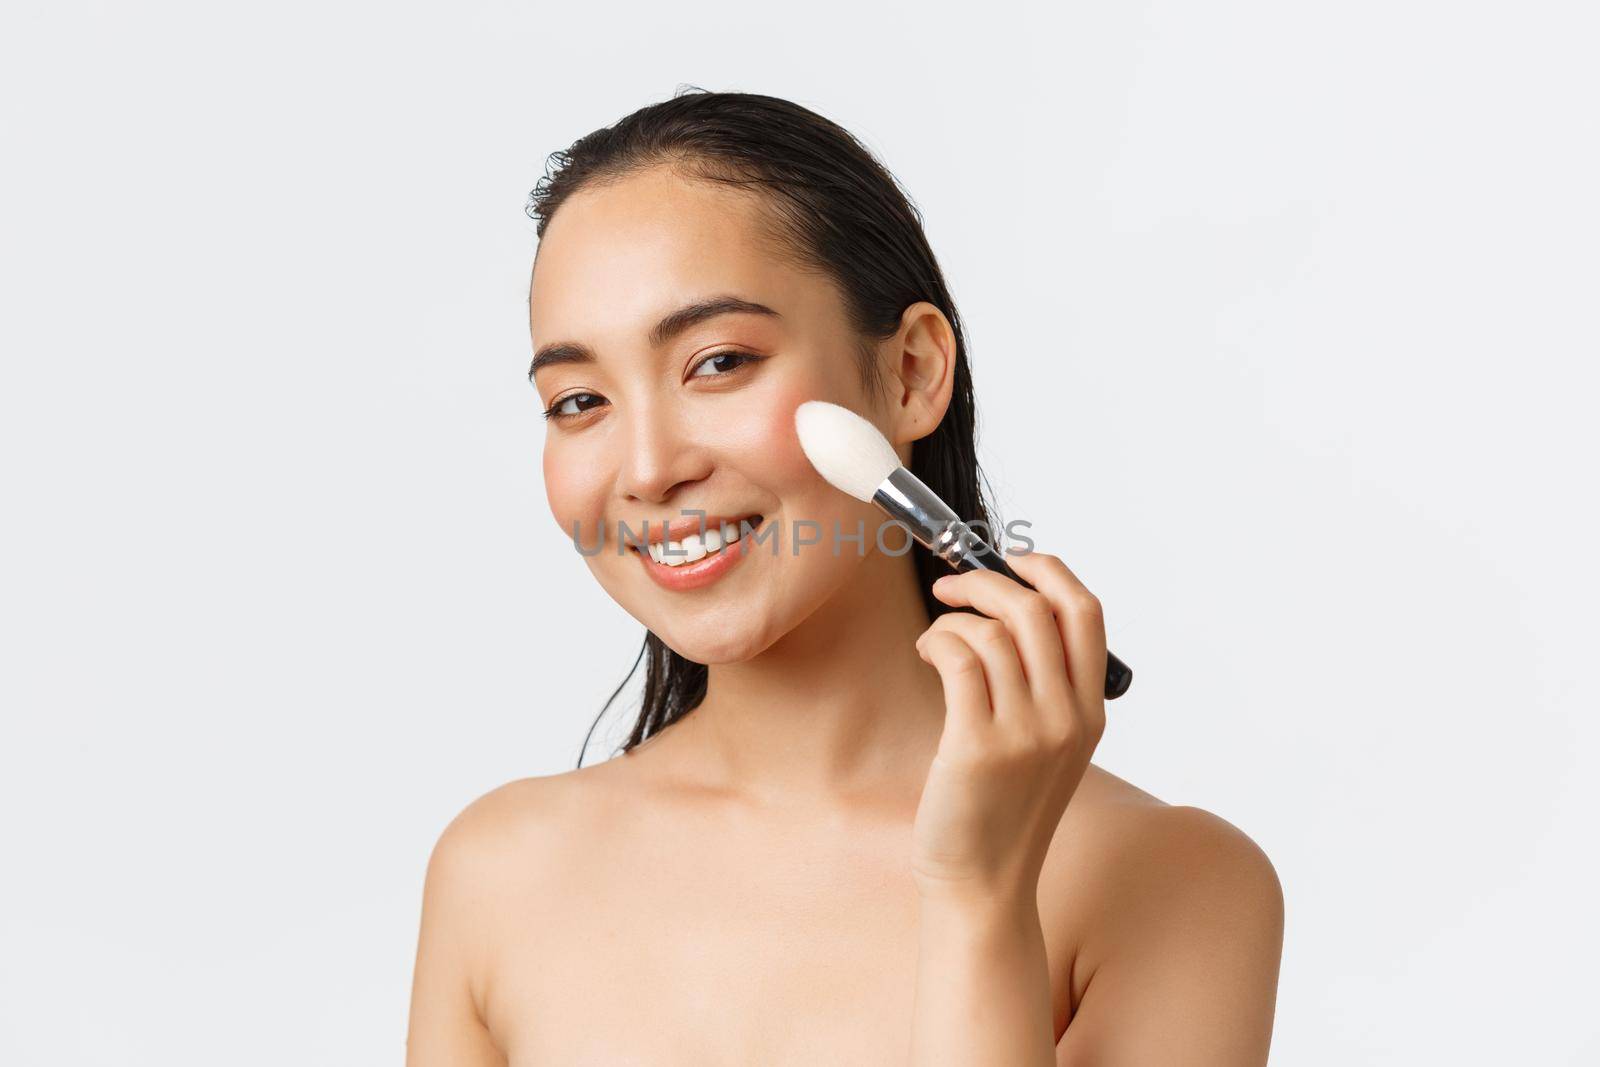 Skincare, women beauty, hygiene and personal care concept. Close-up of gorgeous young asian female using makeup brush on cheeks and smiling, standing naked over white background.